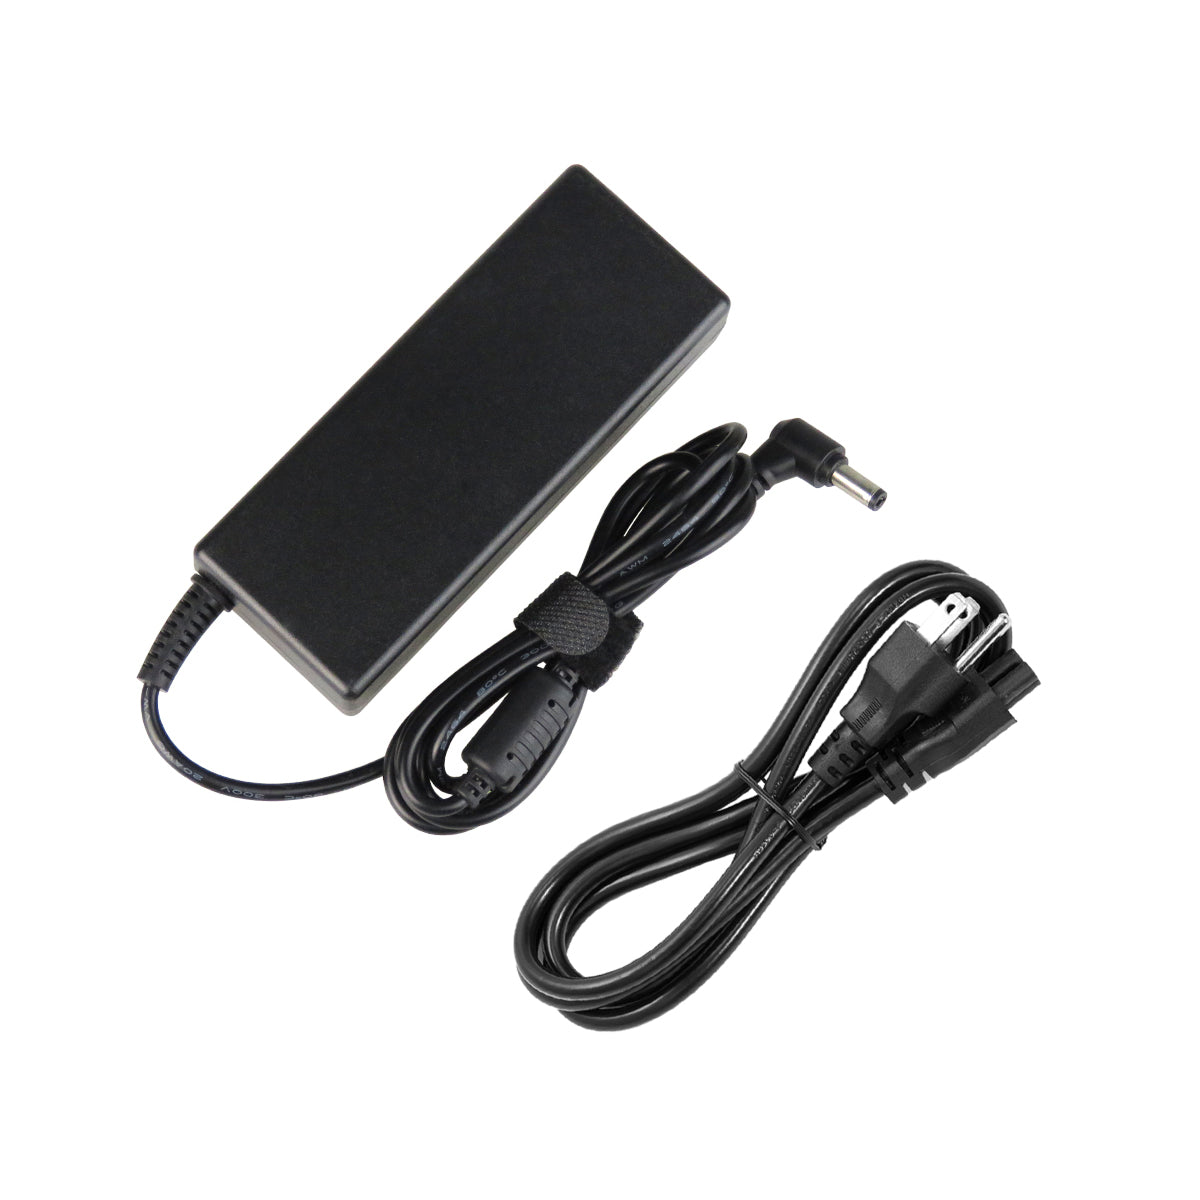 AC Adapter Charger for ASUS A85VJ Notebook.